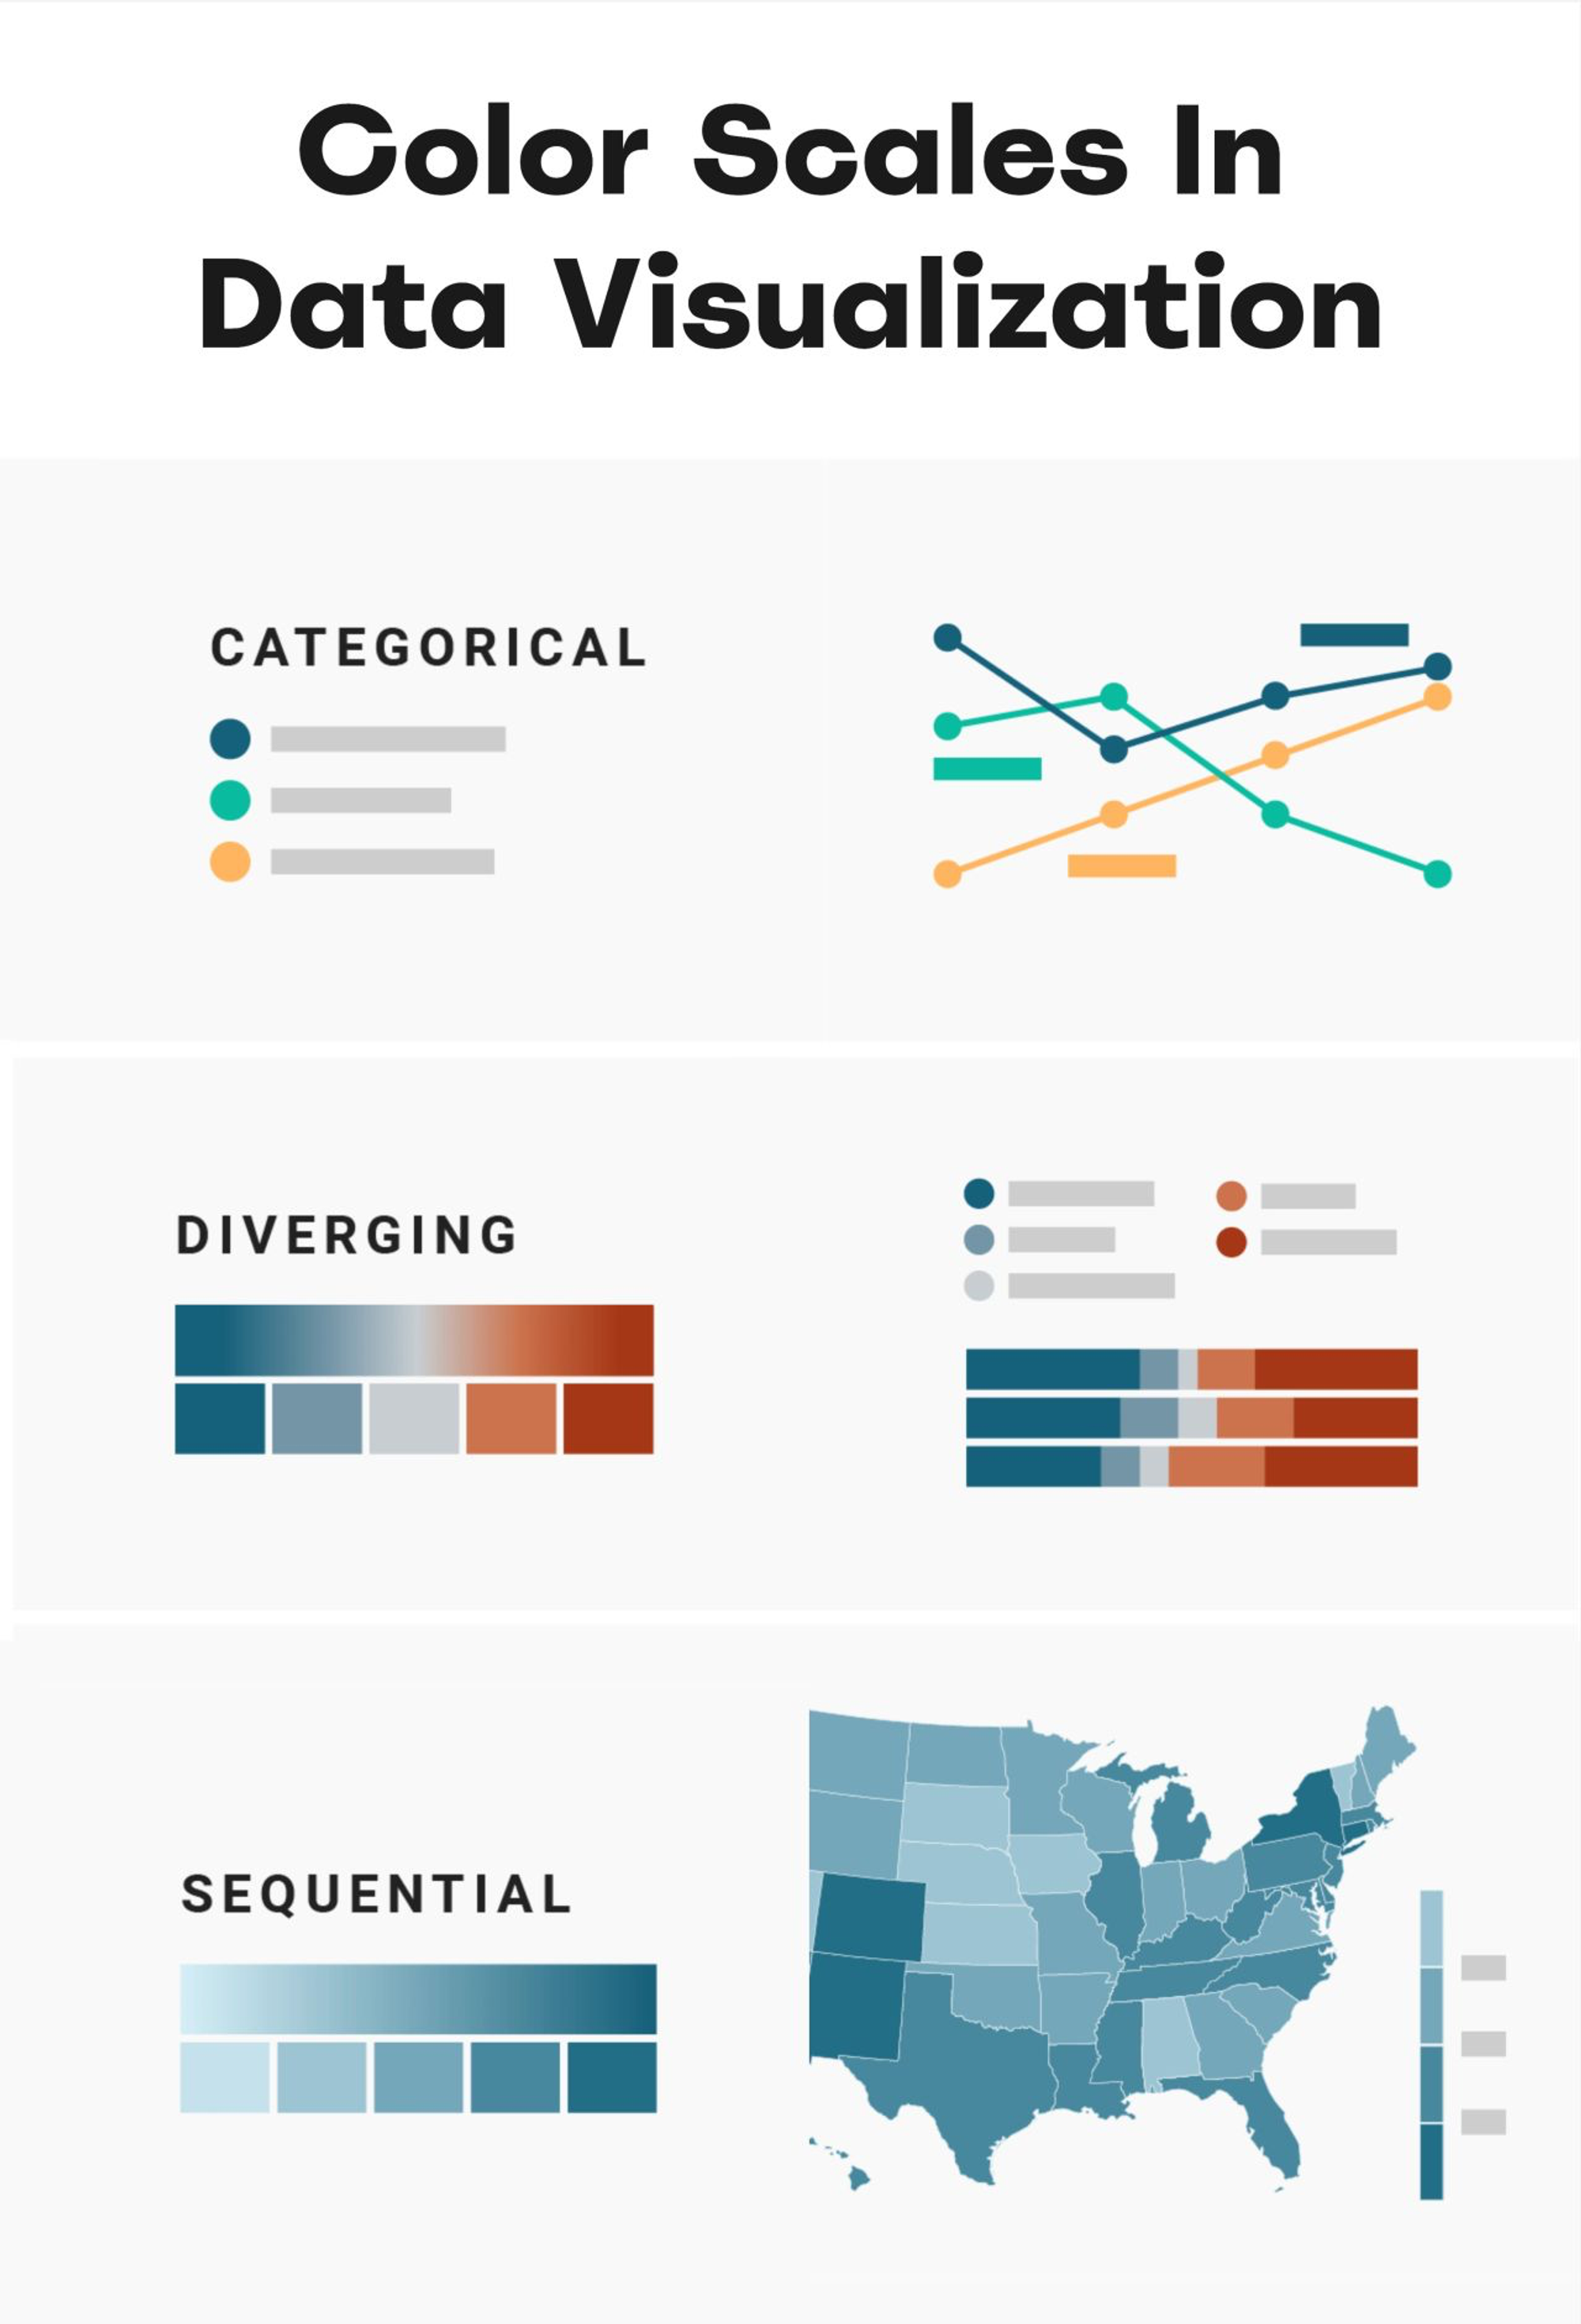  Color Scales In Data Visualization  by Vitaly Firedman